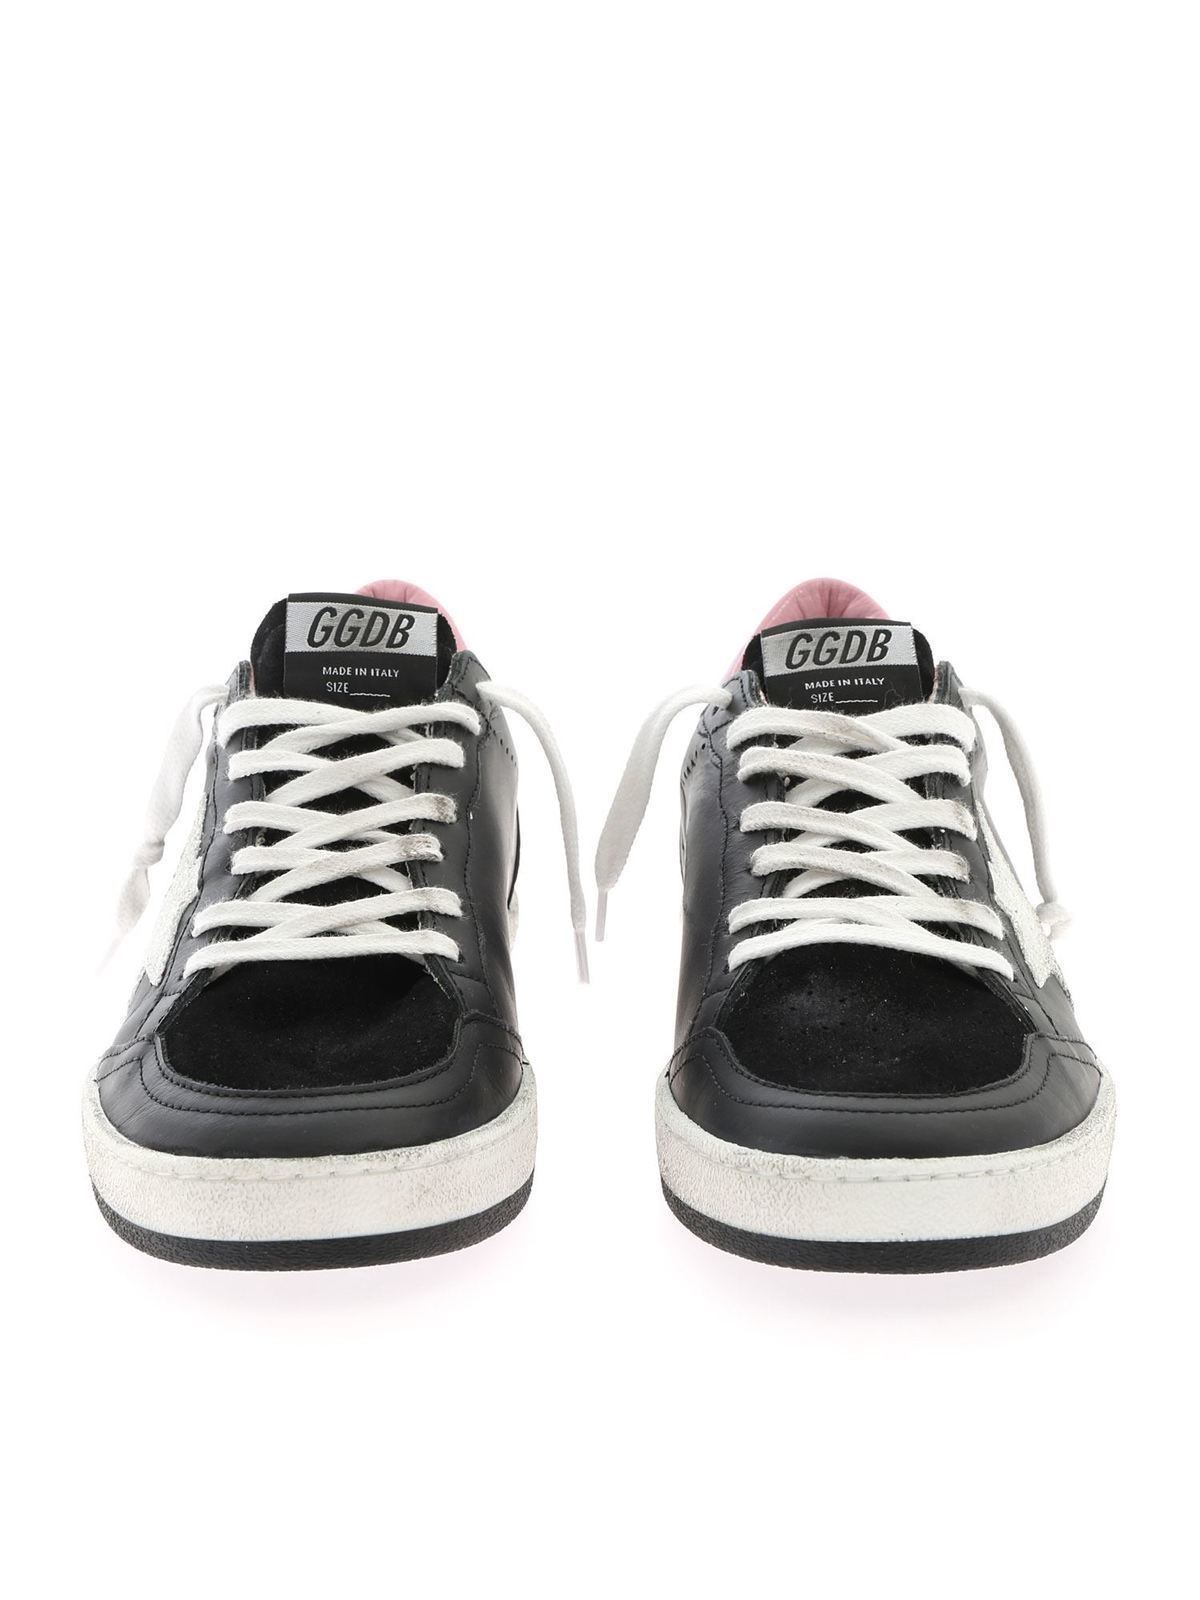 Super-Star LTD sneakers with pink screen printed star and leather heel tab  | Golden Goose